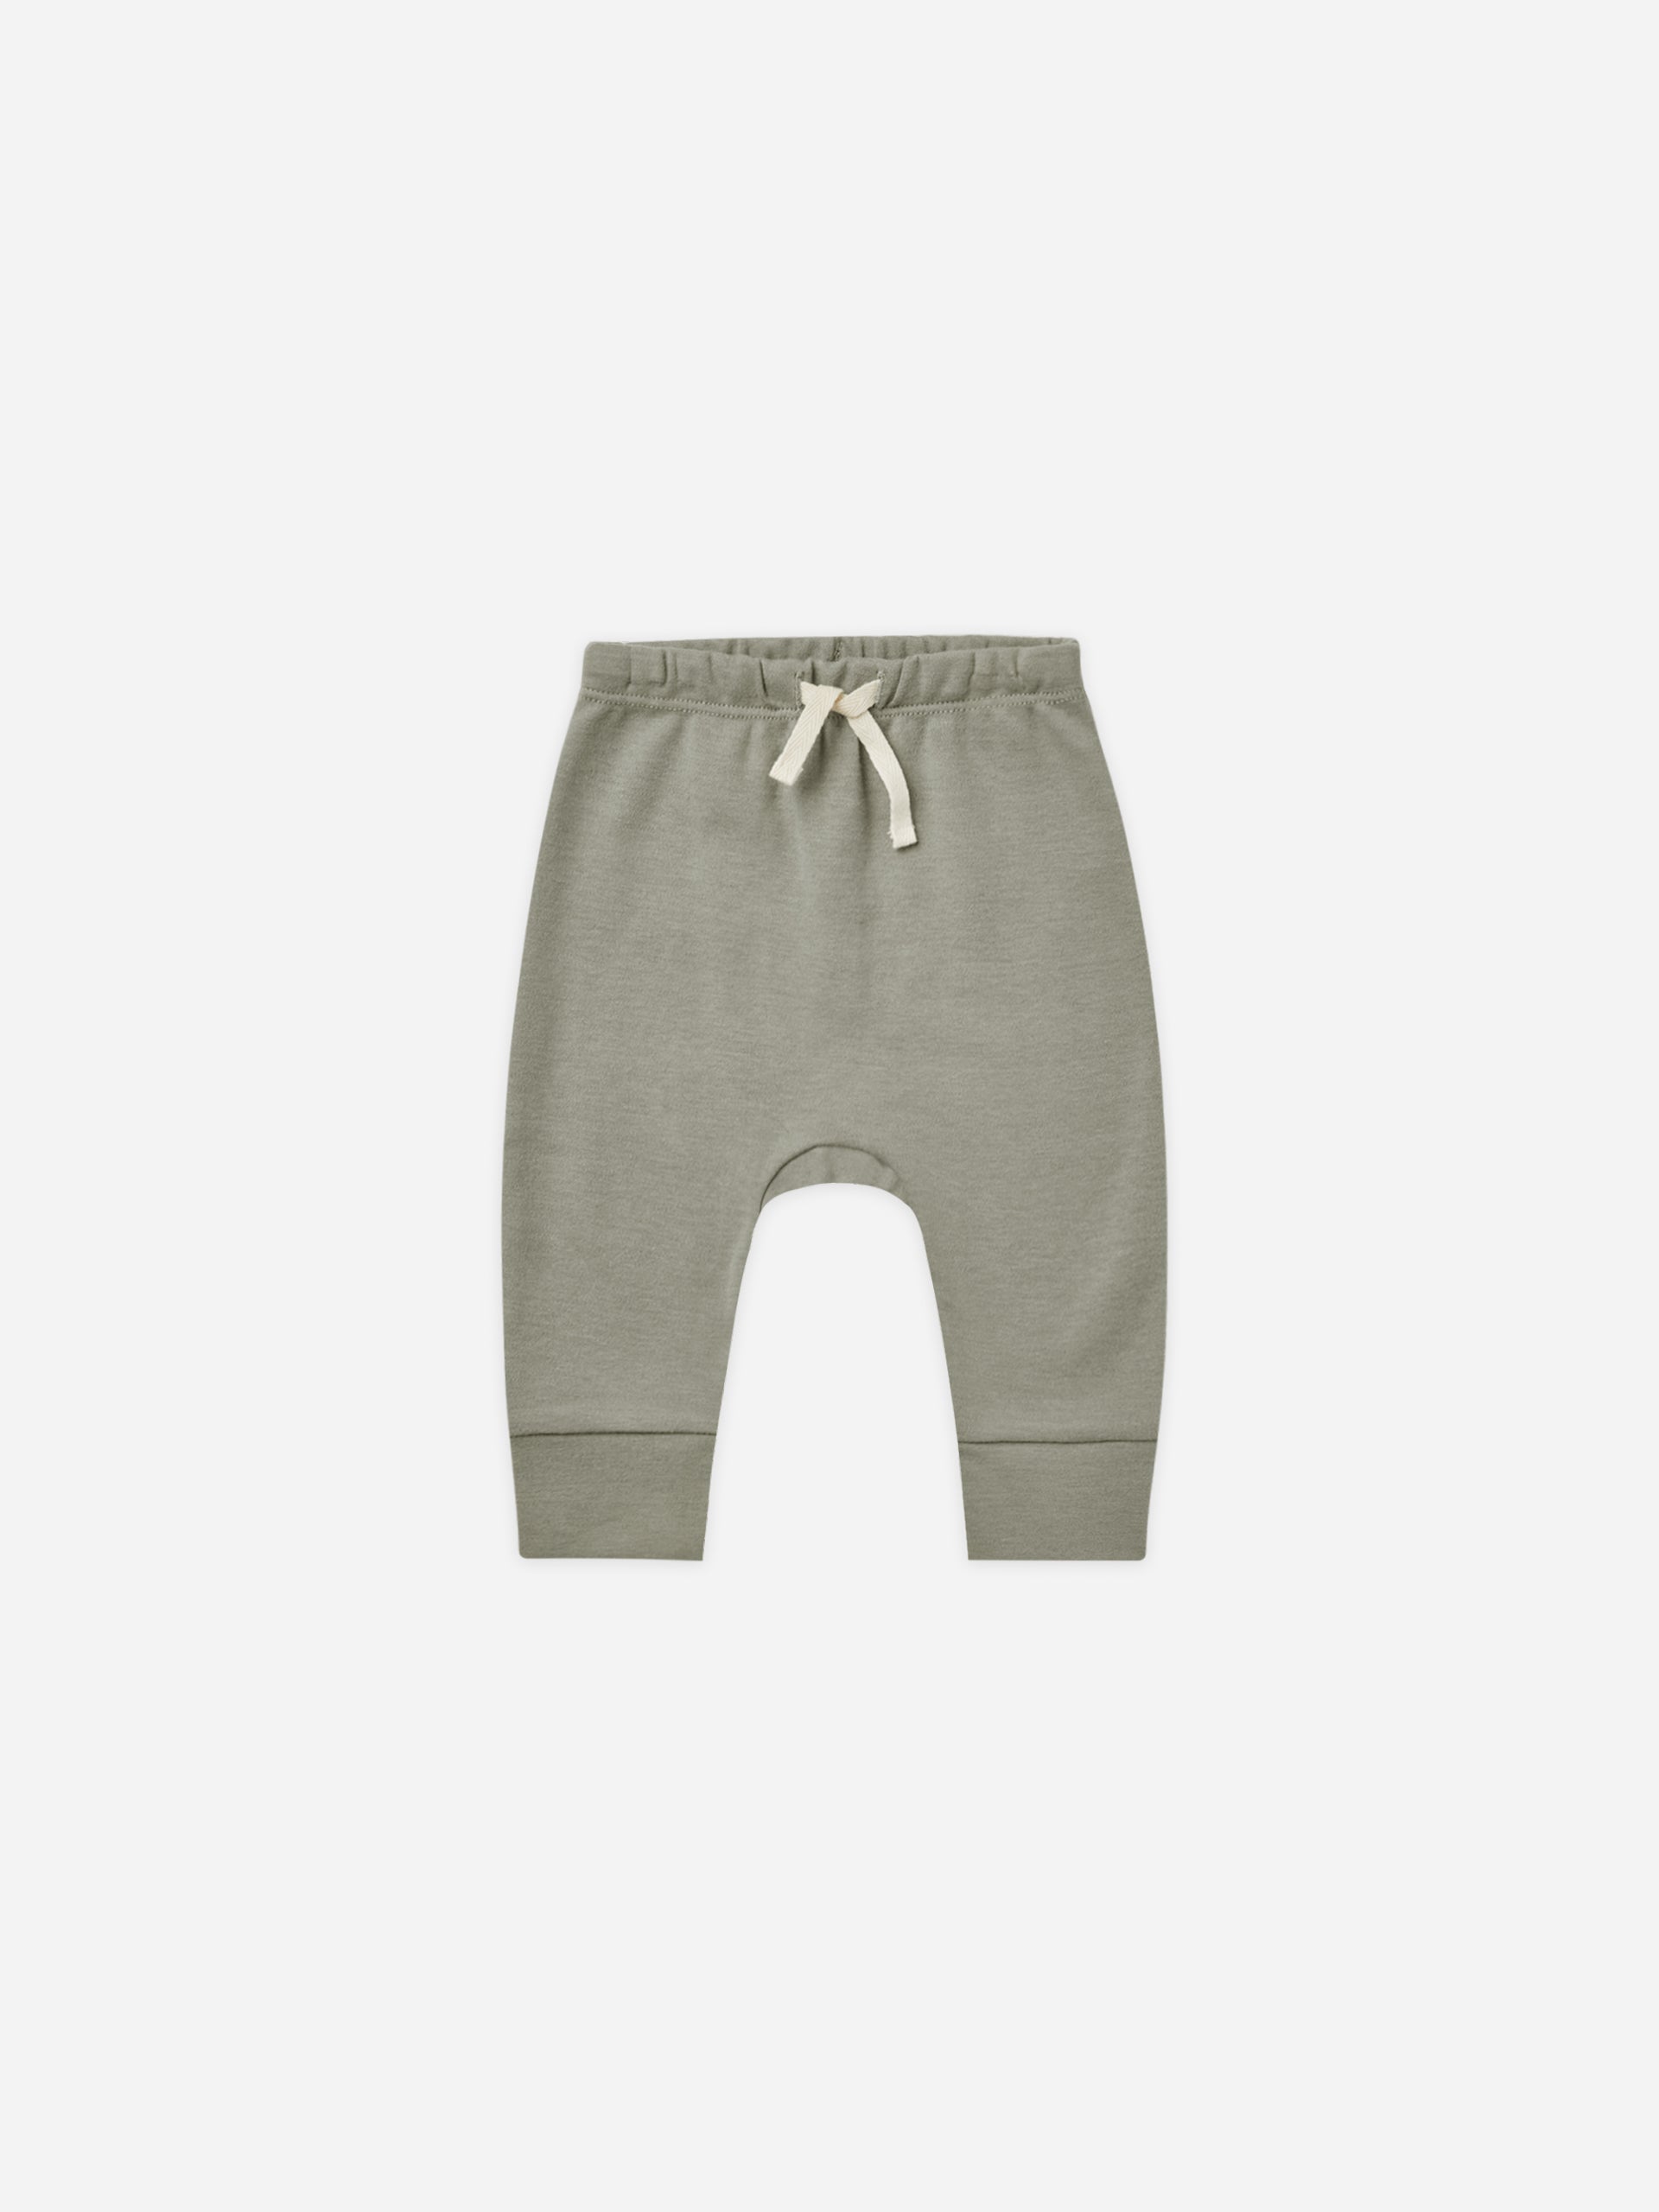 Drawstring Pant || Basil - Rylee + Cru | Kids Clothes | Trendy Baby Clothes | Modern Infant Outfits |